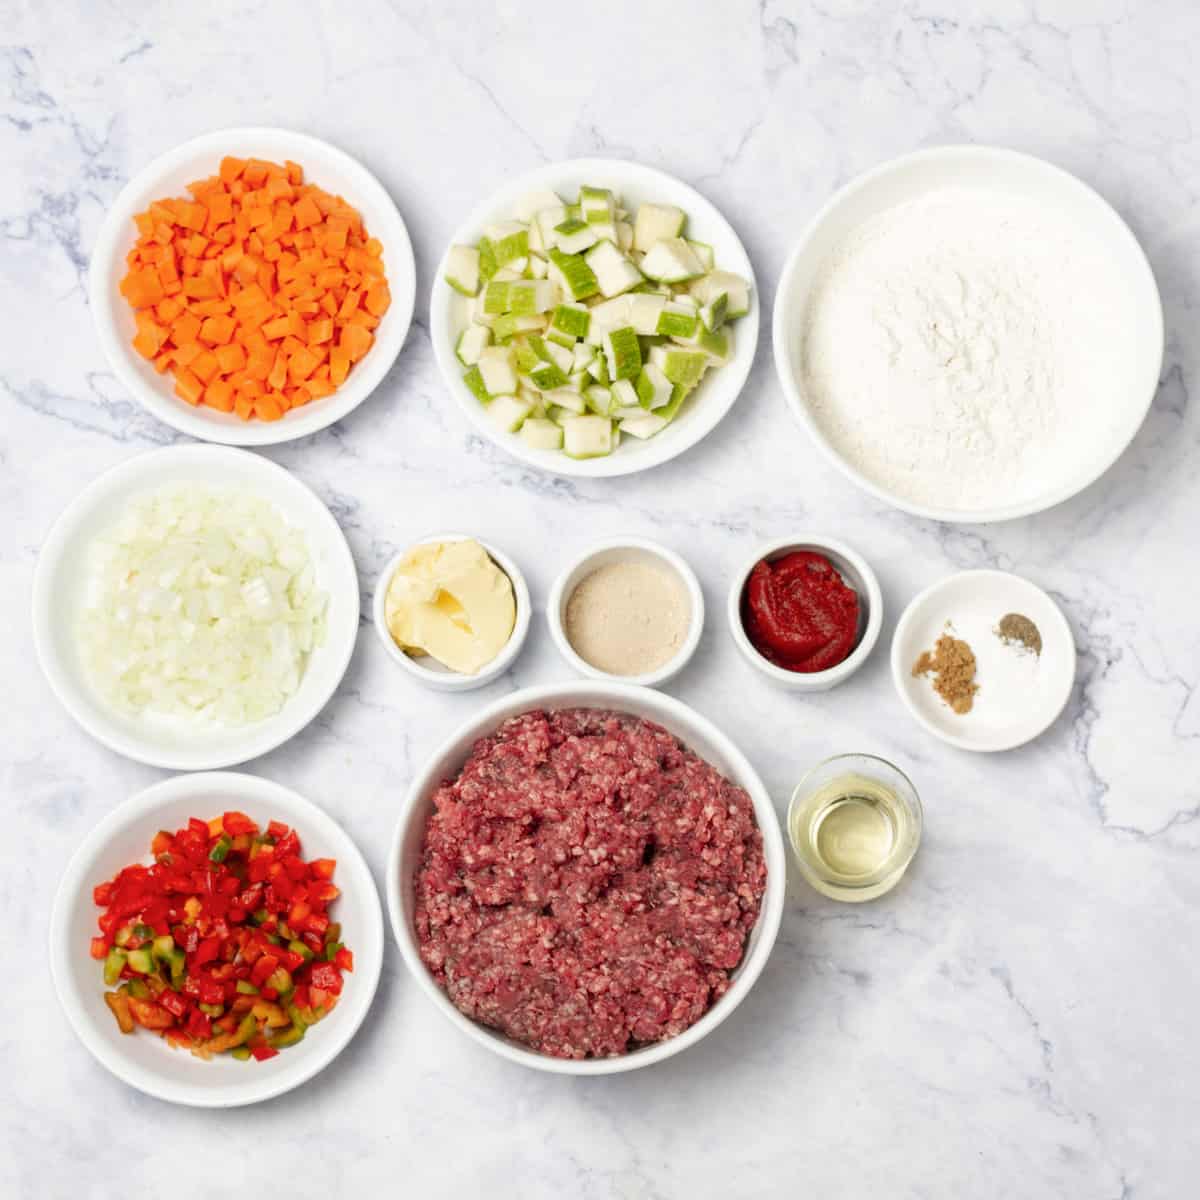 Beef Pie ingredients of flour, yeast, butter, vegetables, ground beef, tomato paste, and seasonings in separate dishes. 